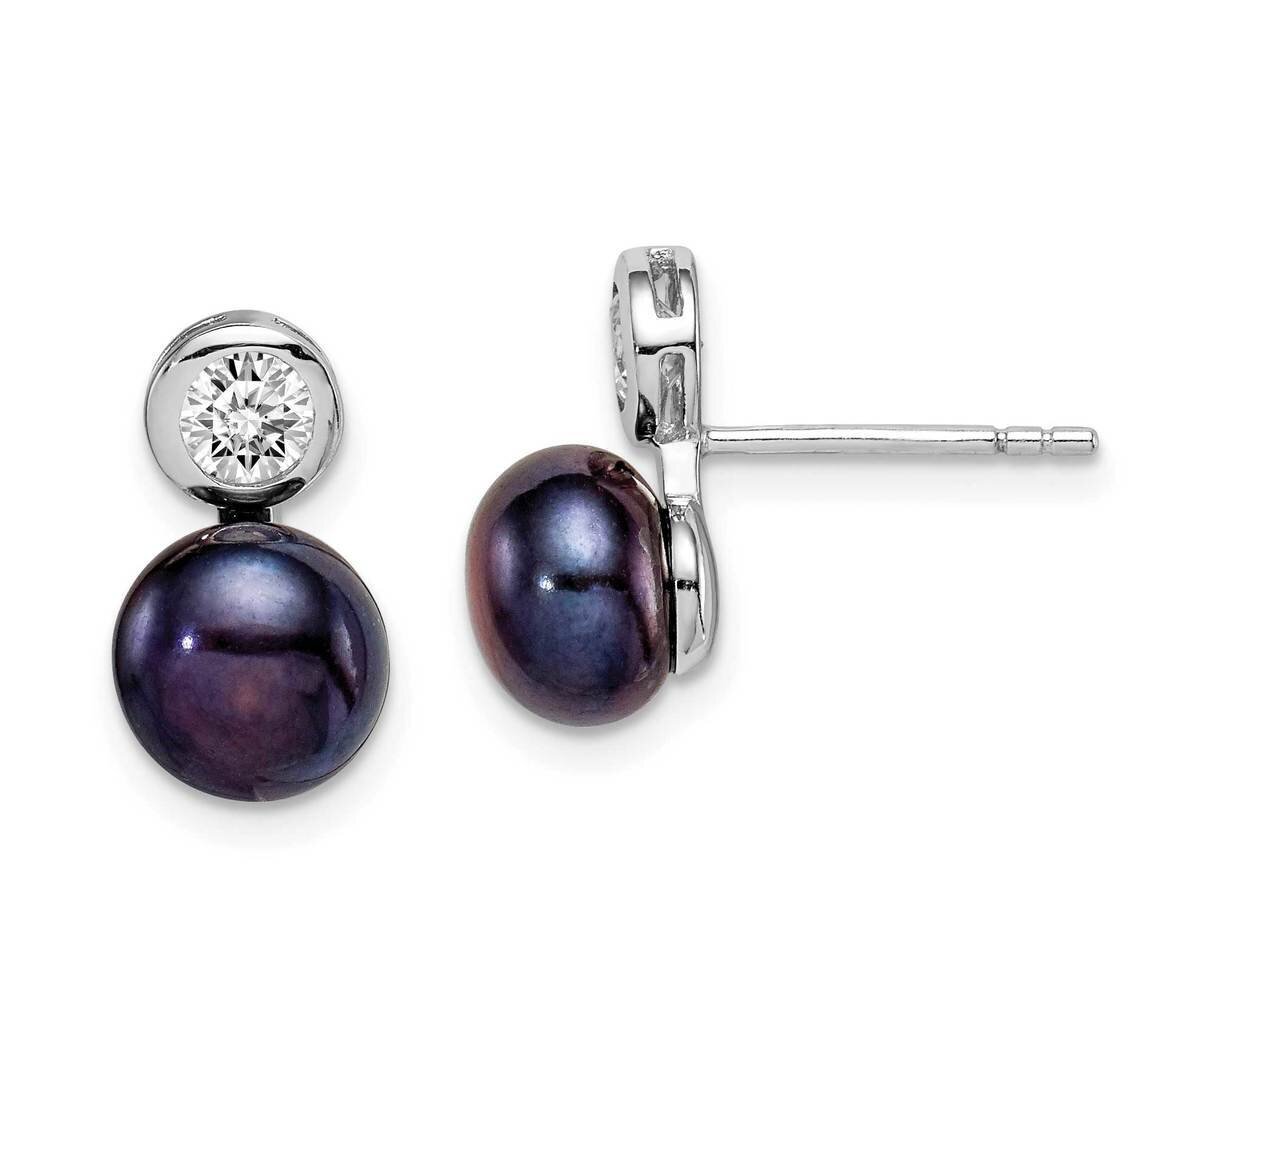 7-8mm Black Button Freshwater Cultured Pearl CZ Diamond Earrings Sterling Silver Rhodium Plated QE15259